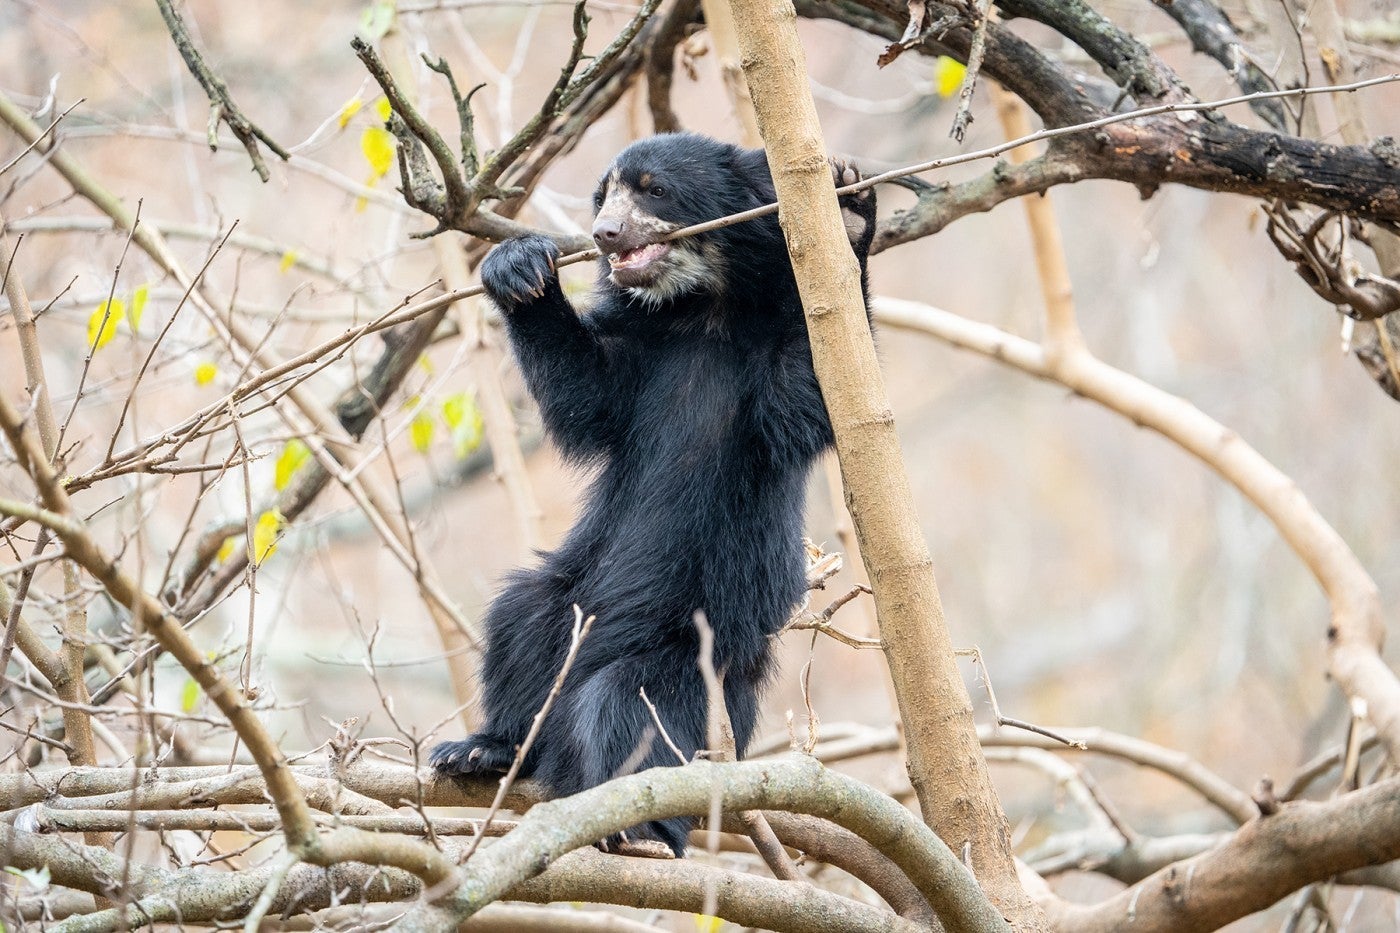 Andean bear cub Ian gnaws on a branch in the treetop.